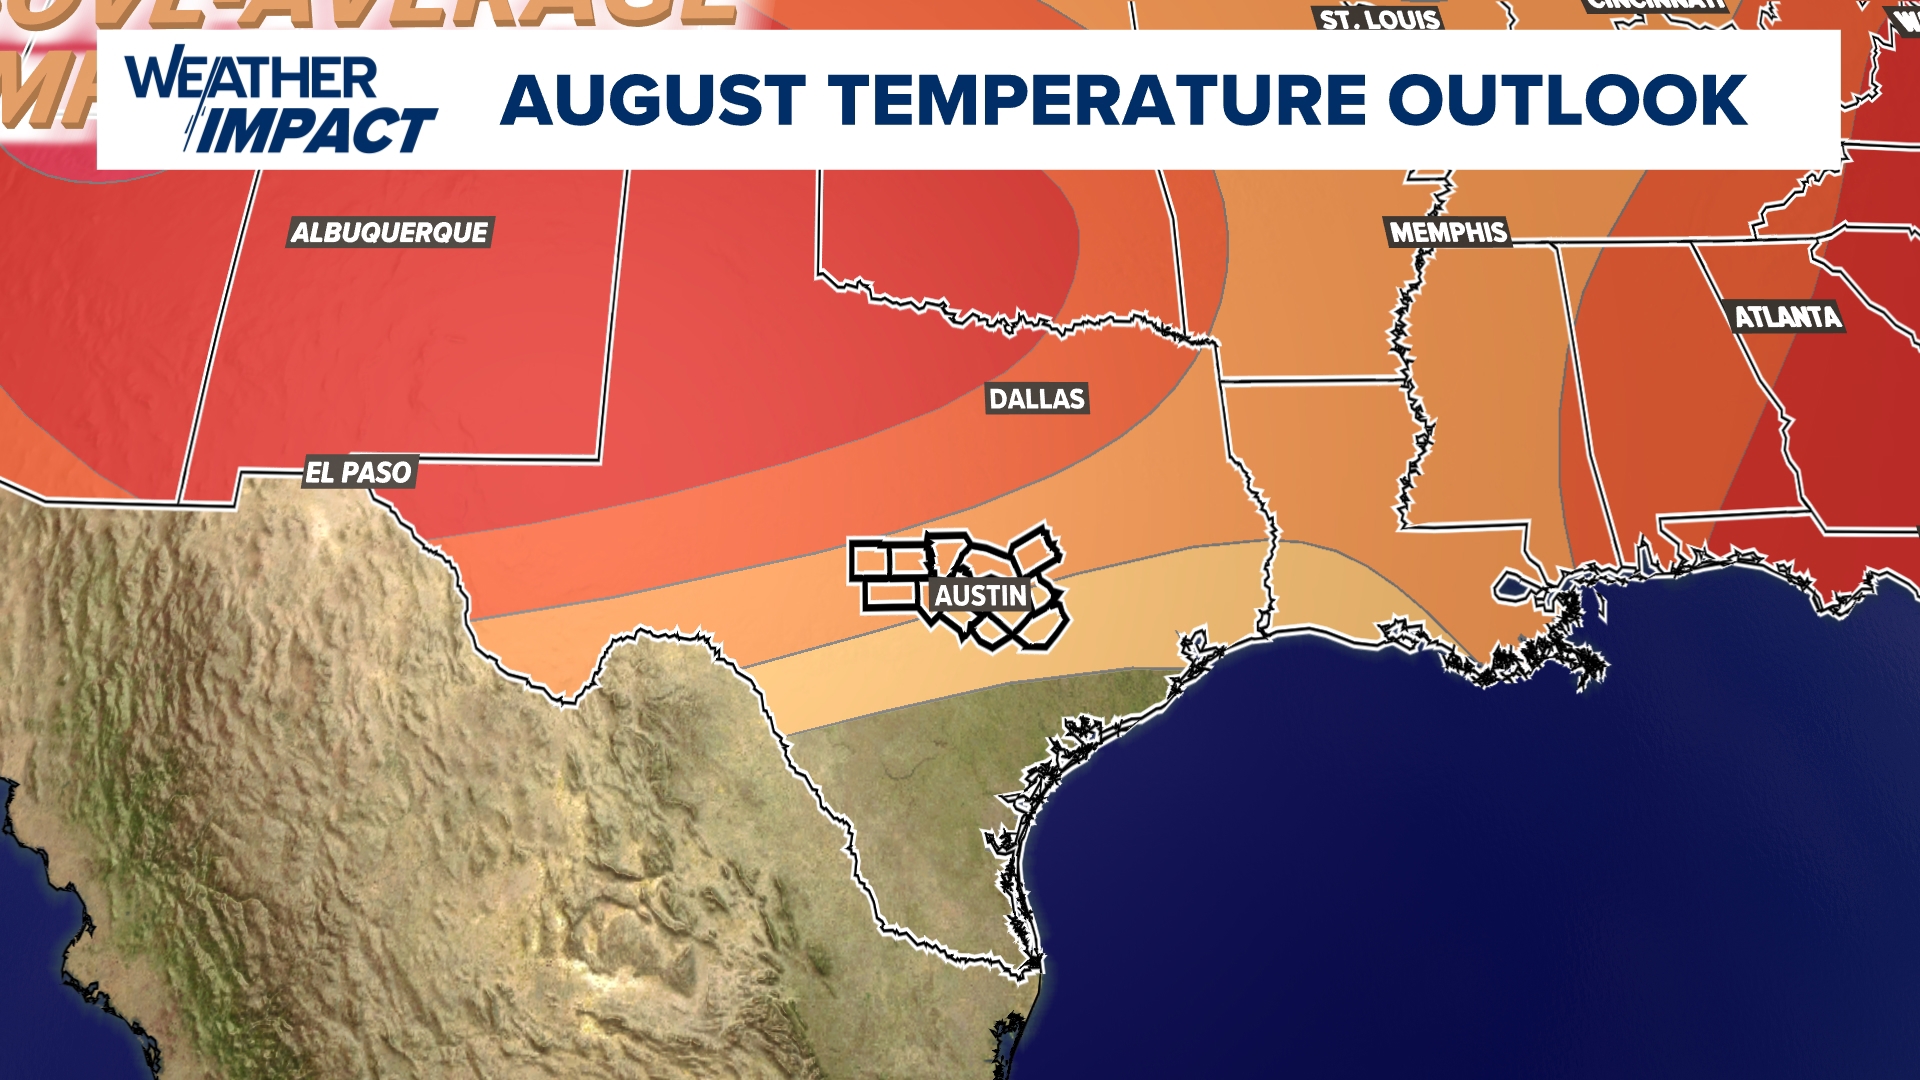 We're tracking a likely warmer than normal August, and with average highs at 99, that spells triple-digit days